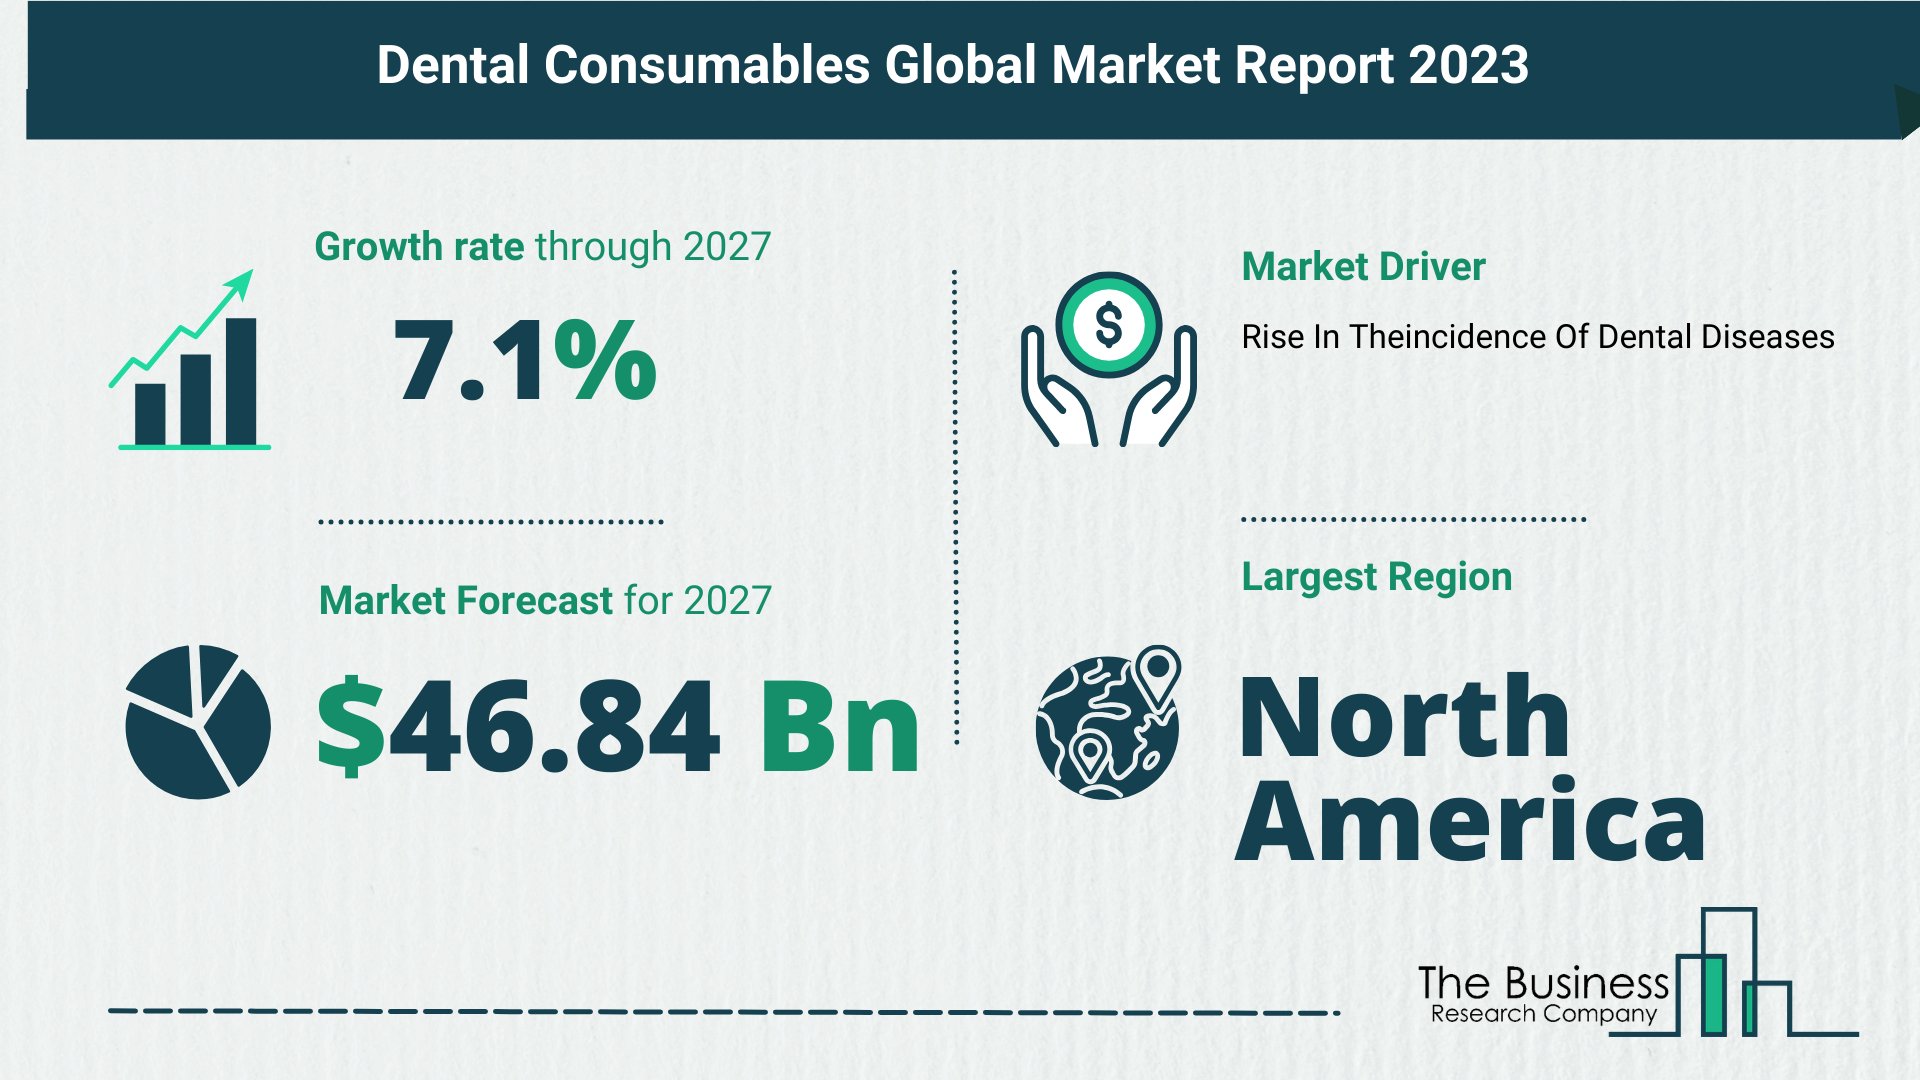 Key Trends And Drivers In The Dental Consumables Market 2023